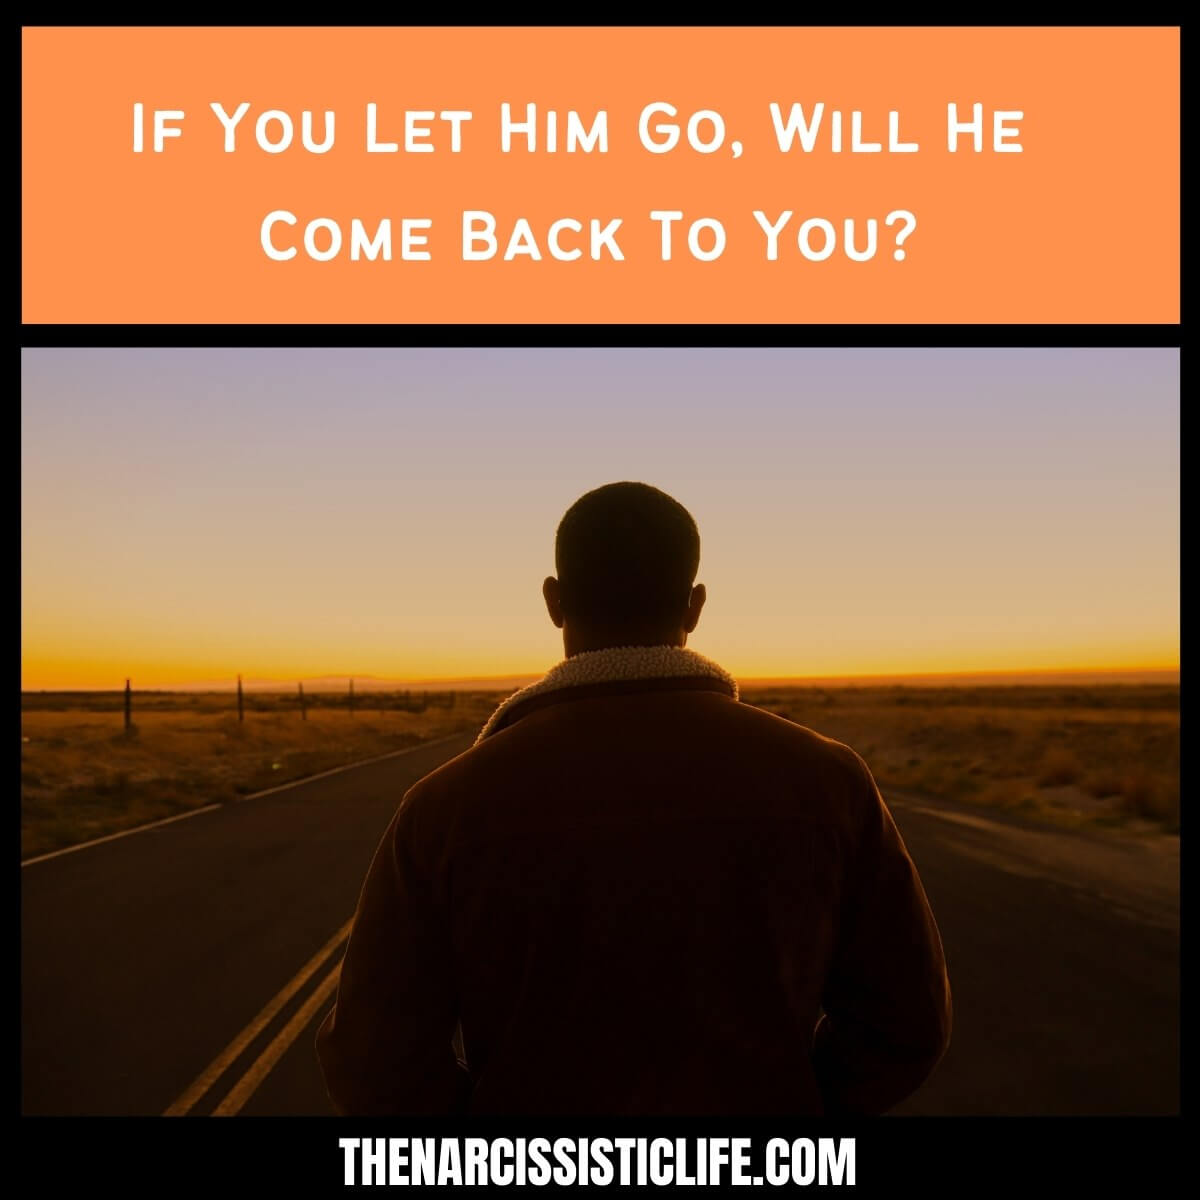 If You Let Him Go, Will He Come Back To You